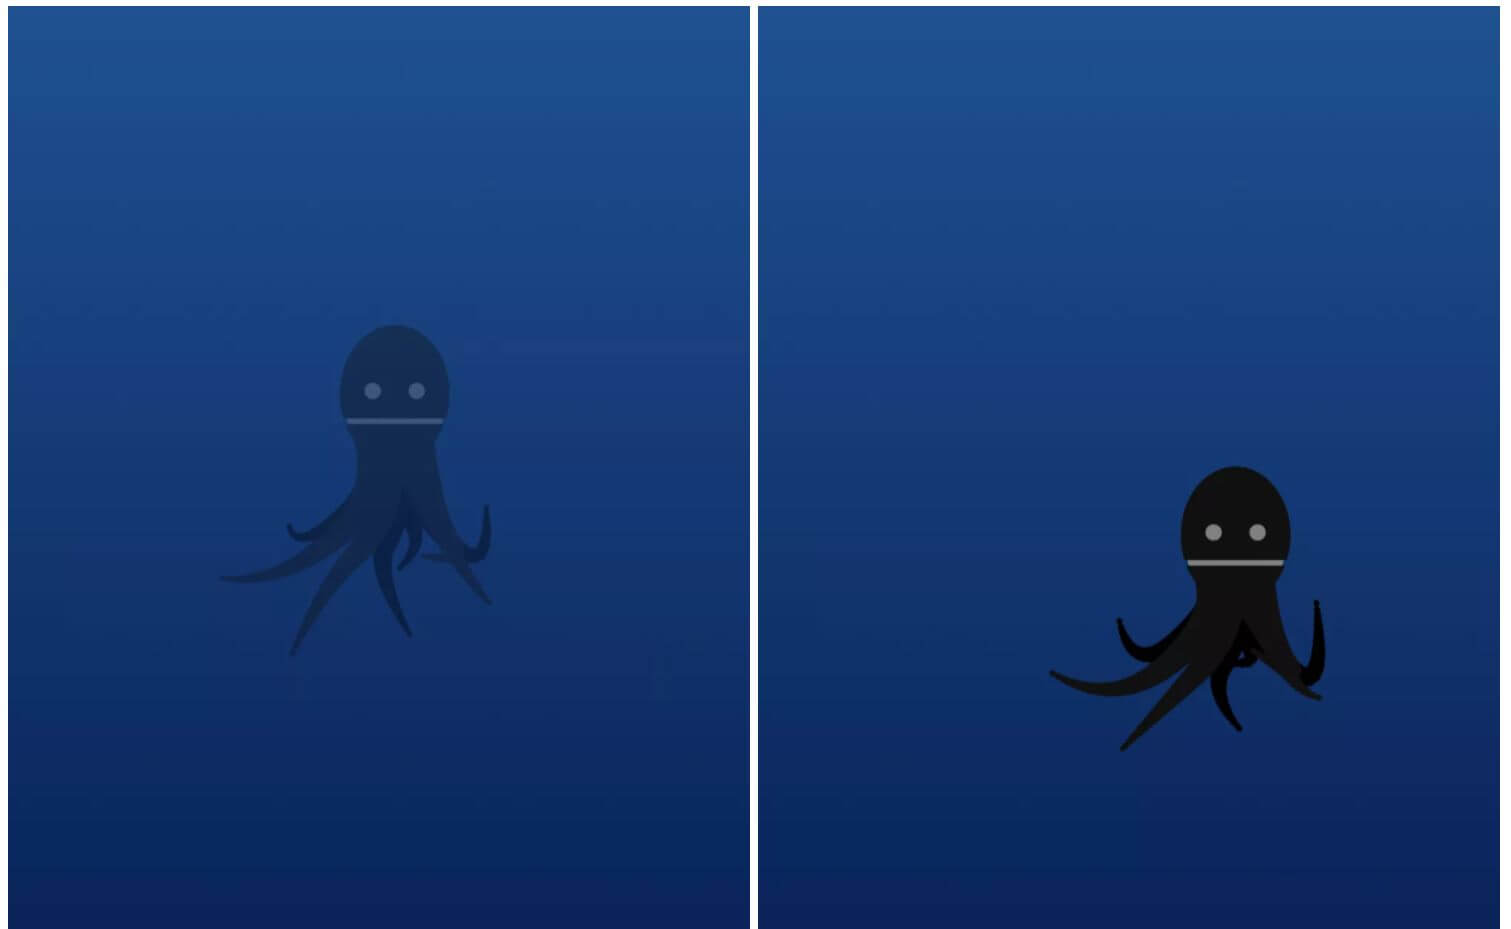 android o octopus